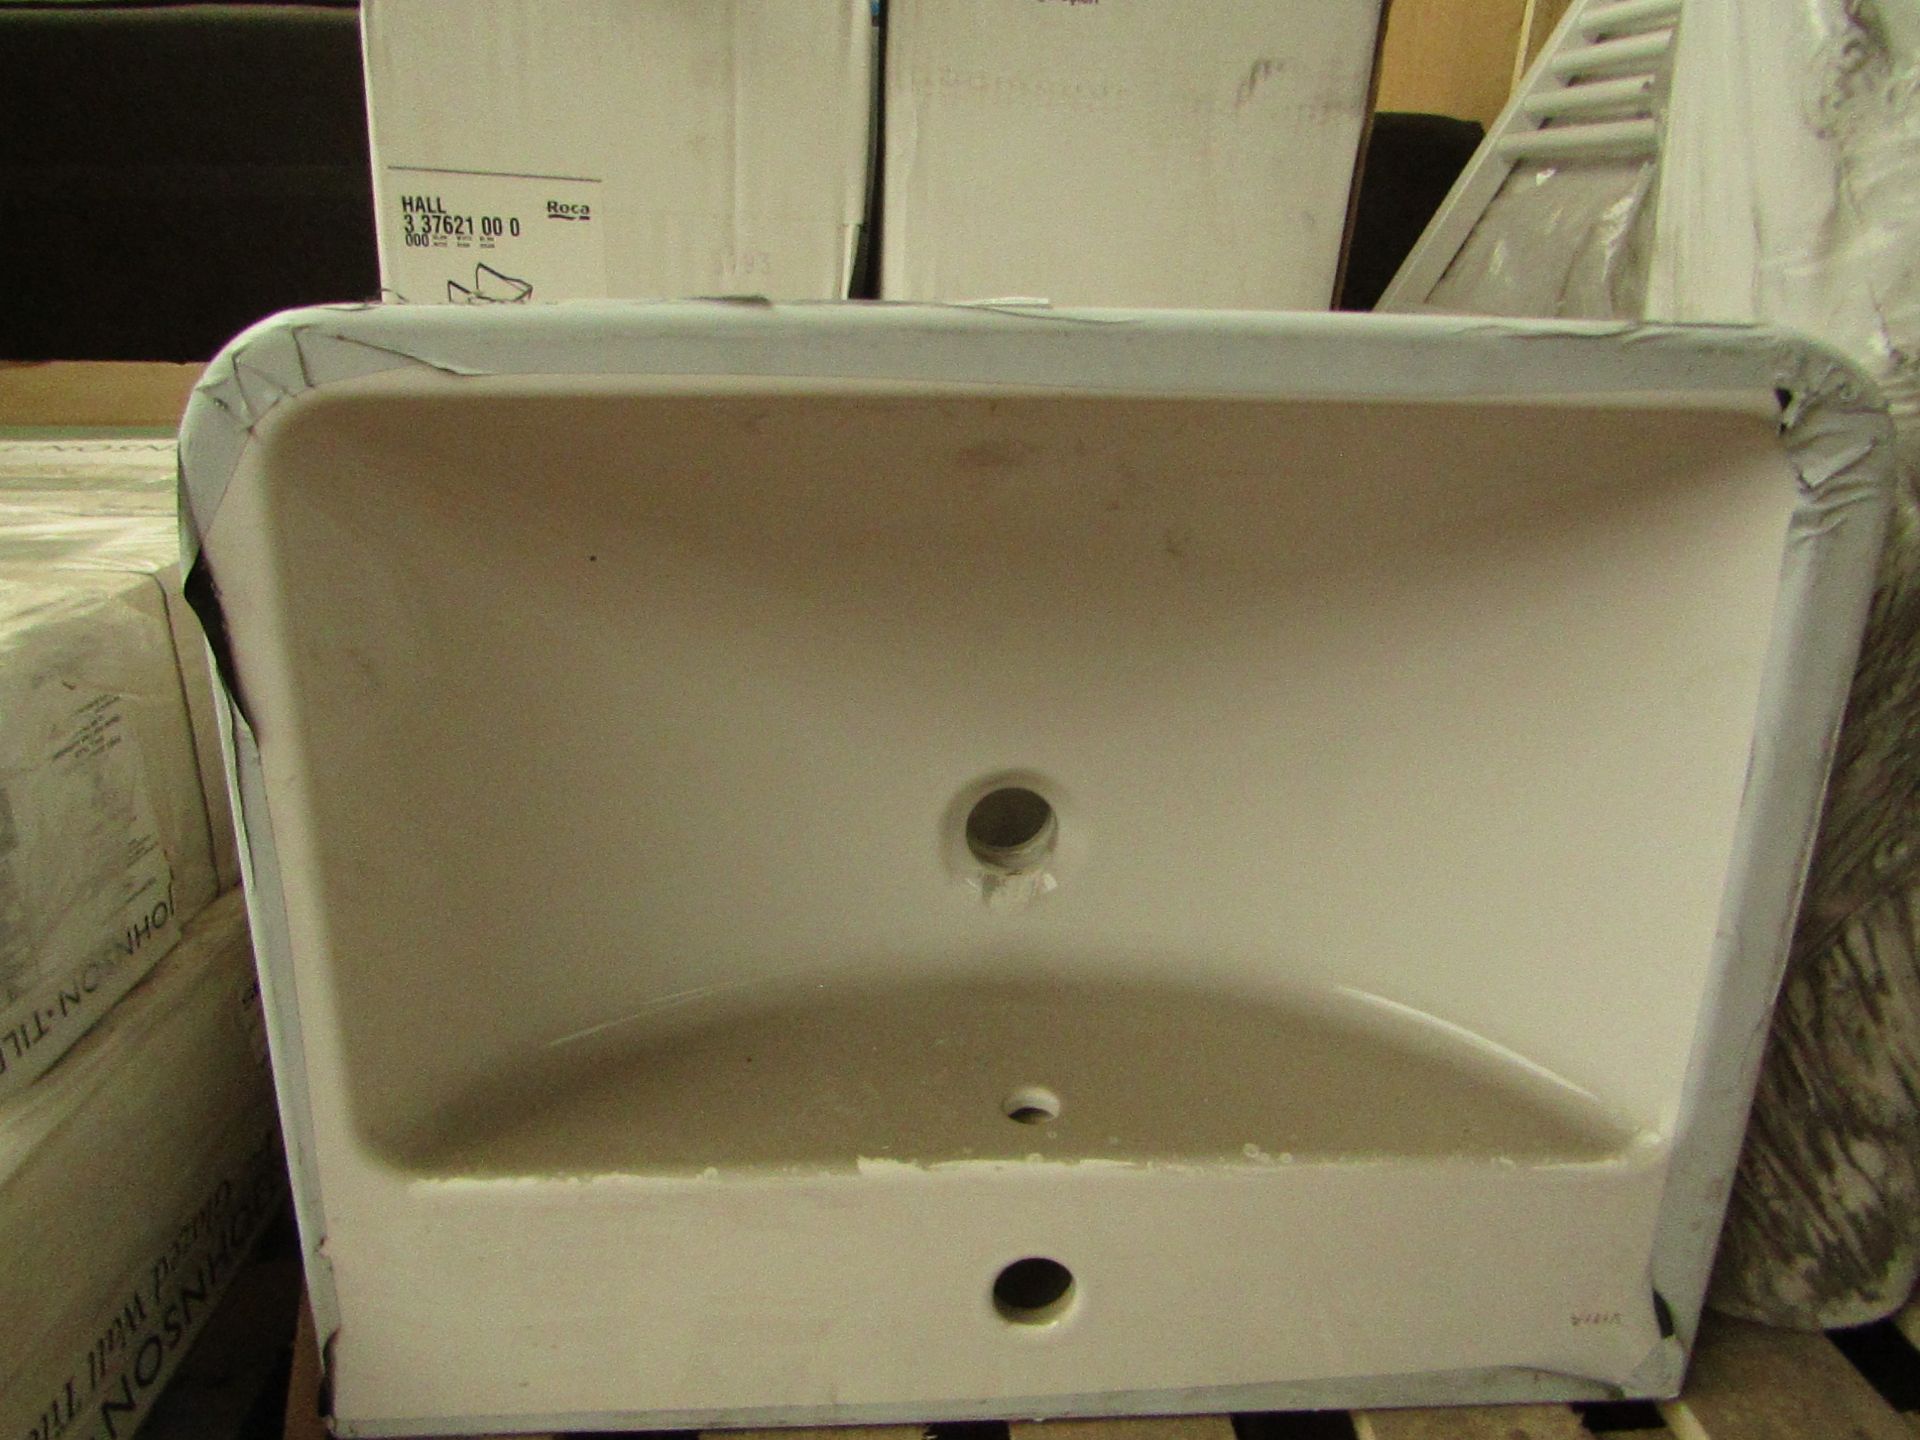 Vitra 1TH basin with universal full pedestal, new.